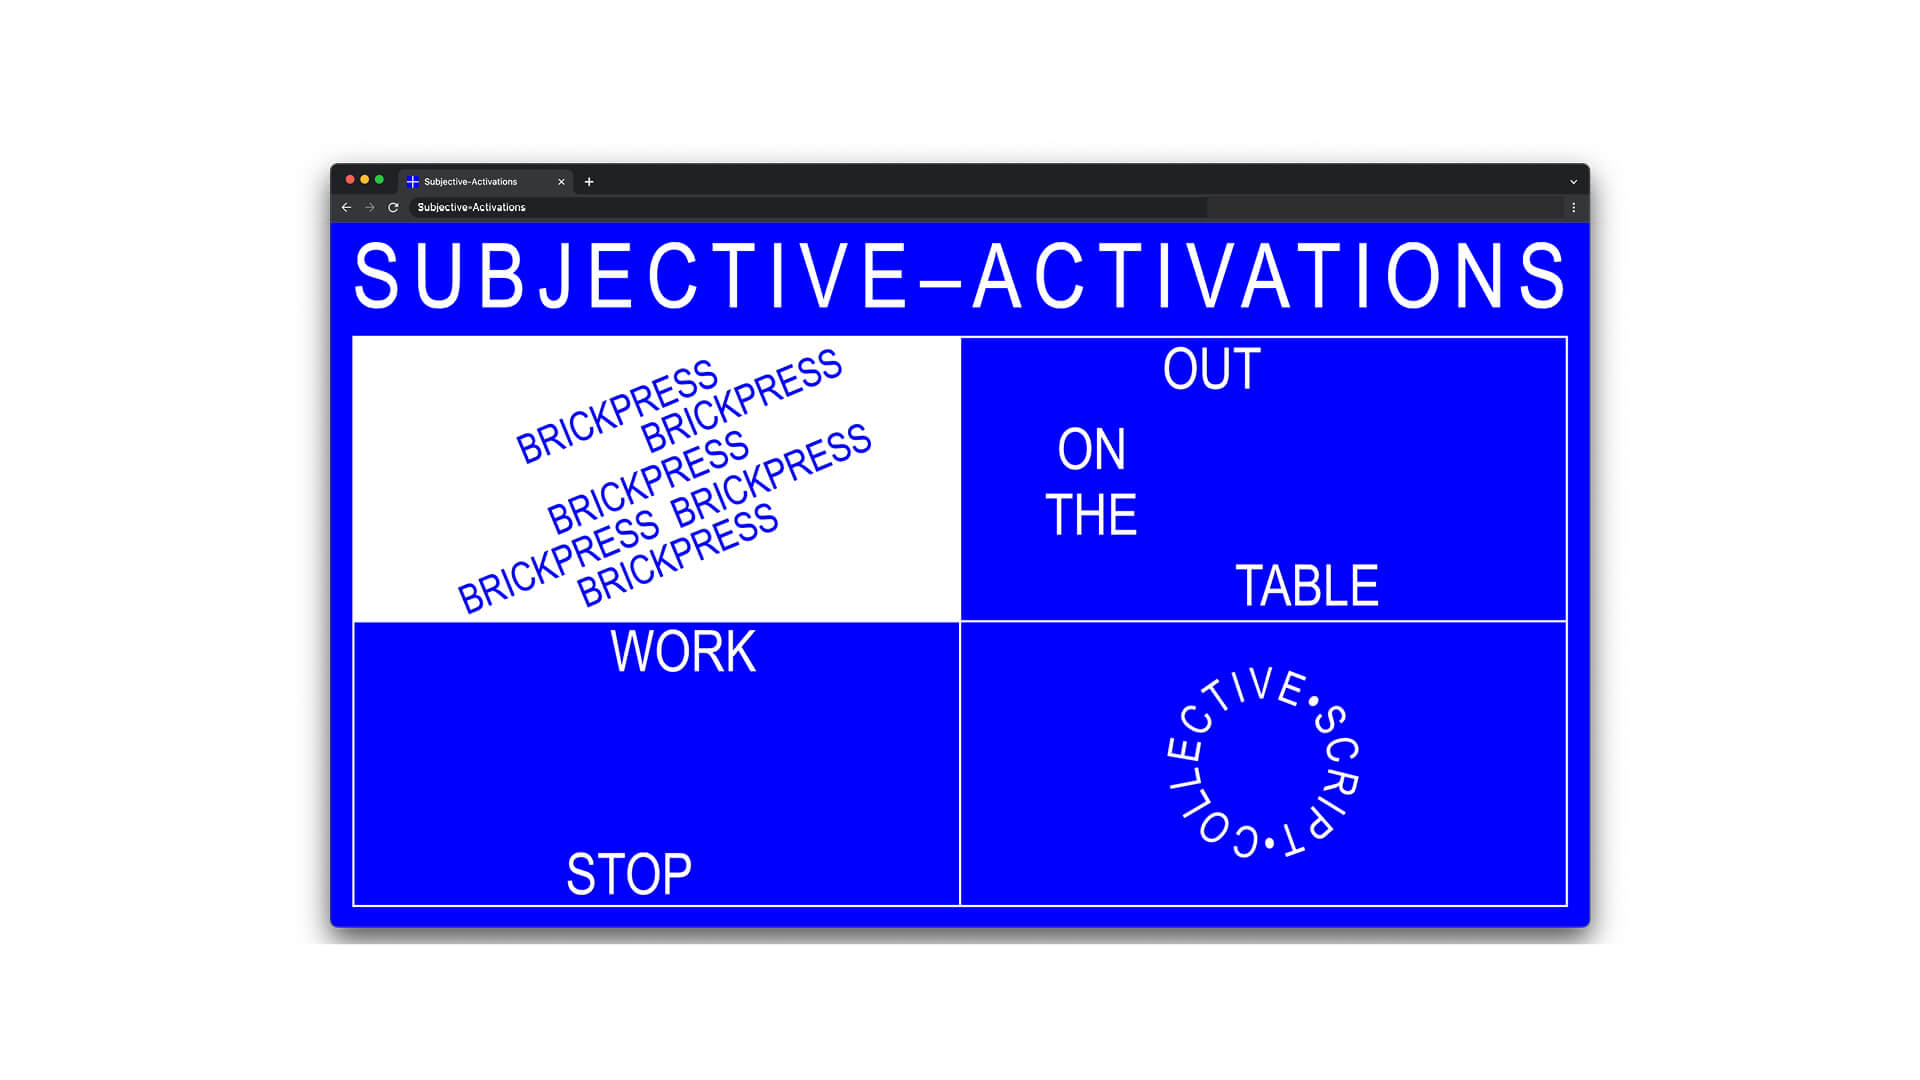 The home of the Subjective Activation site with hover on the Brickpress lab window